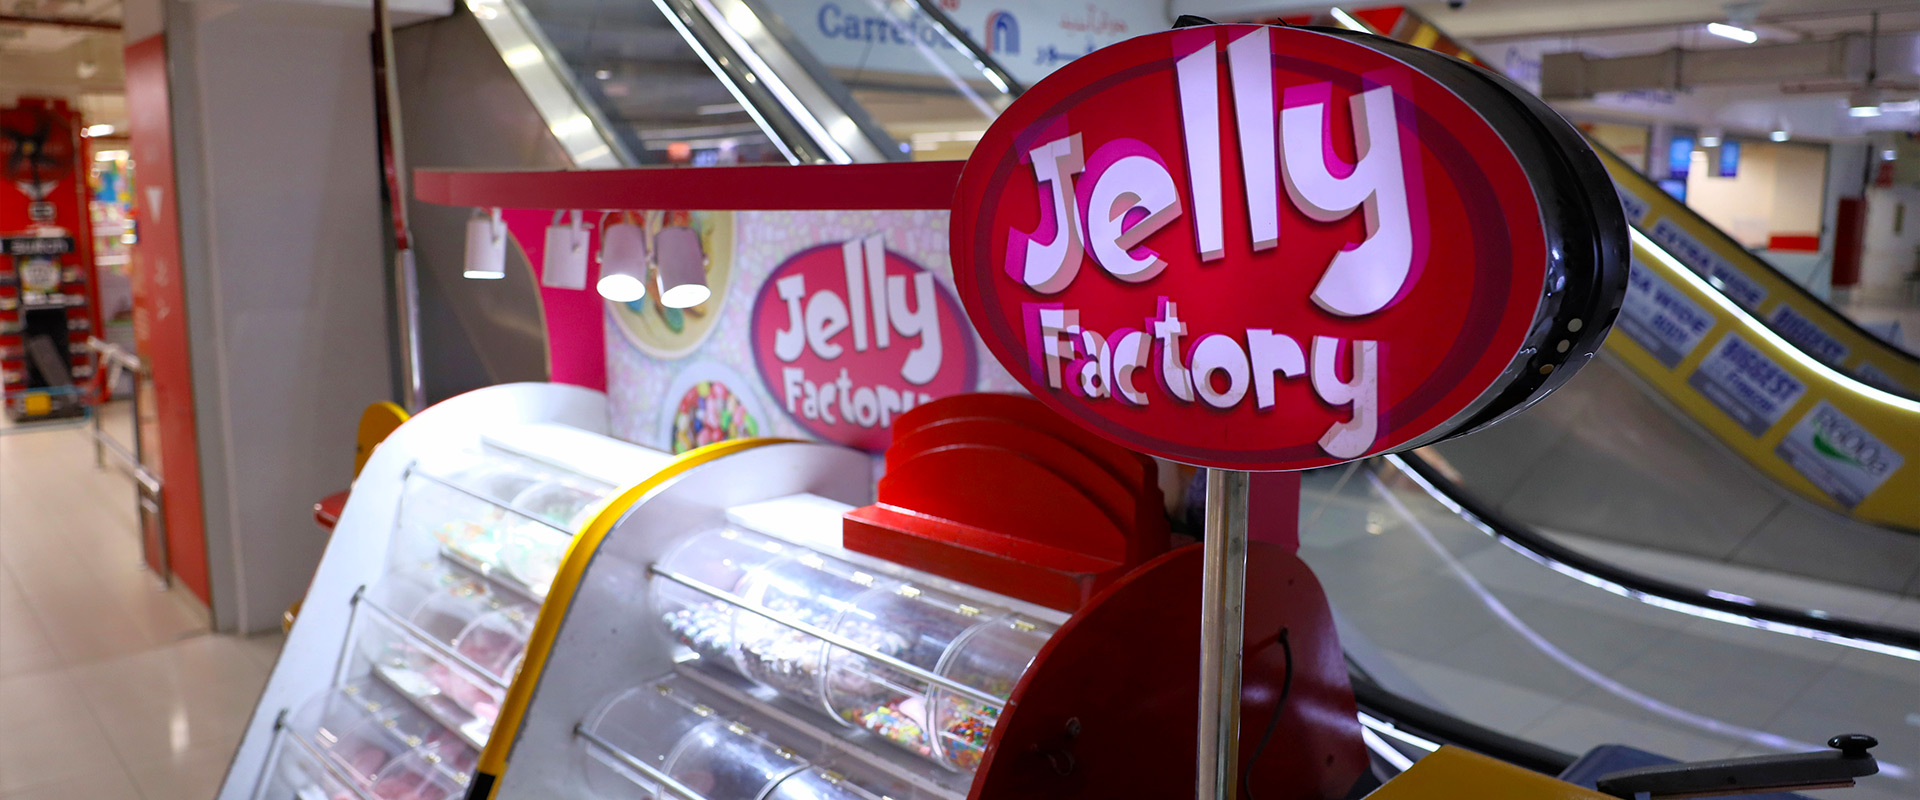 jelly-factory-1